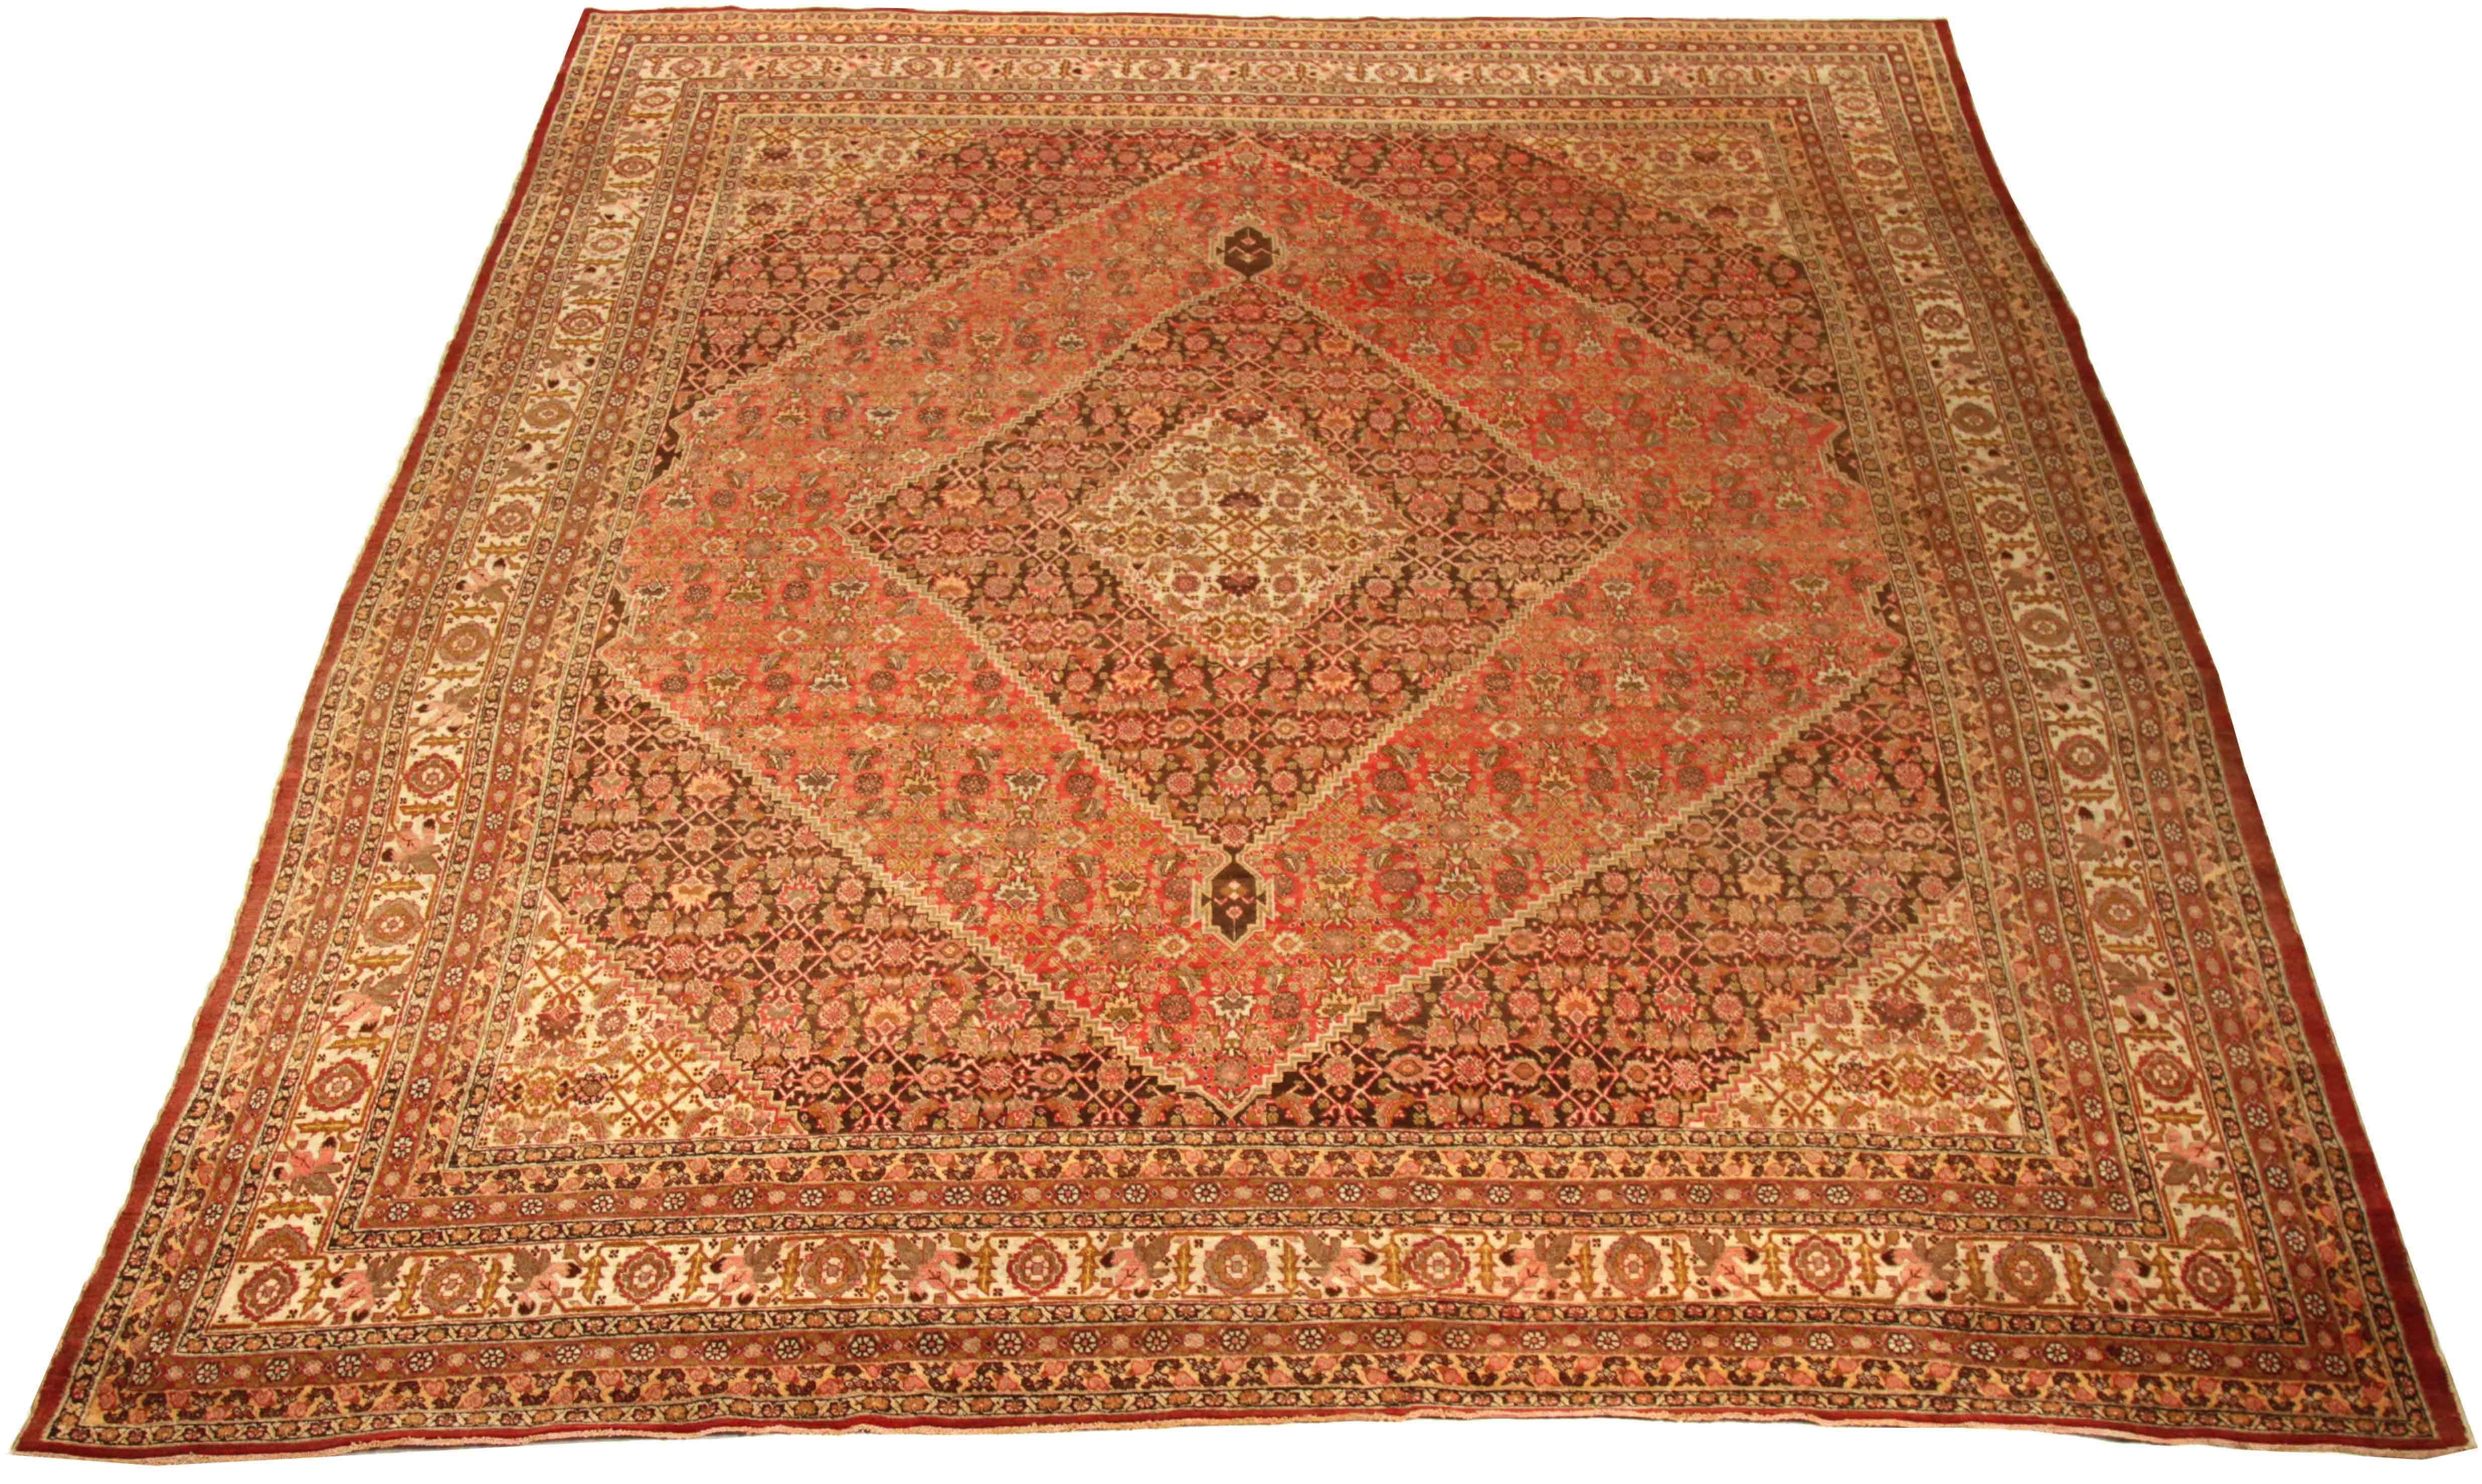 Antique Persian Tabriz Rug with Large Diamond and Floral Patterns, circa 1910s For Sale 1